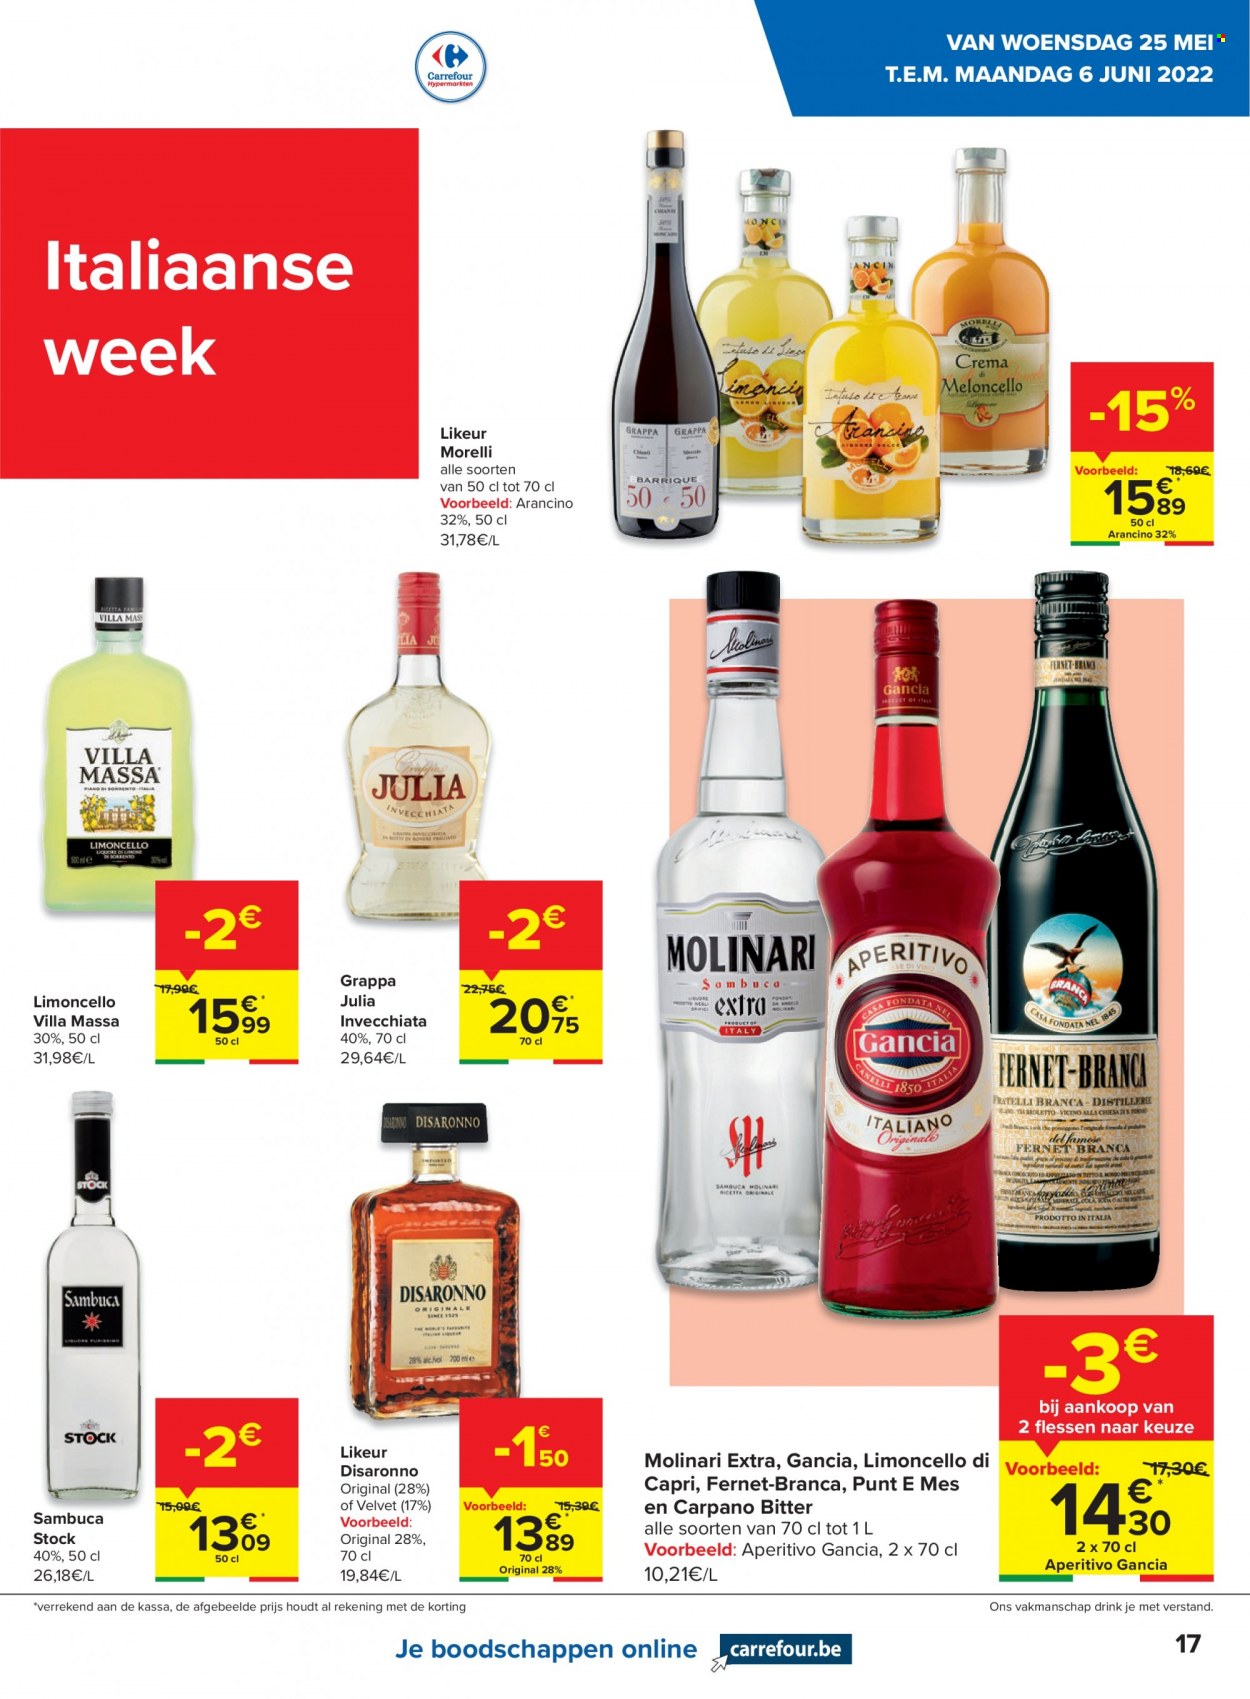 Catalogue Carrefour hypermarkt - 24.5.2022 - 30.5.2022. Page 17.